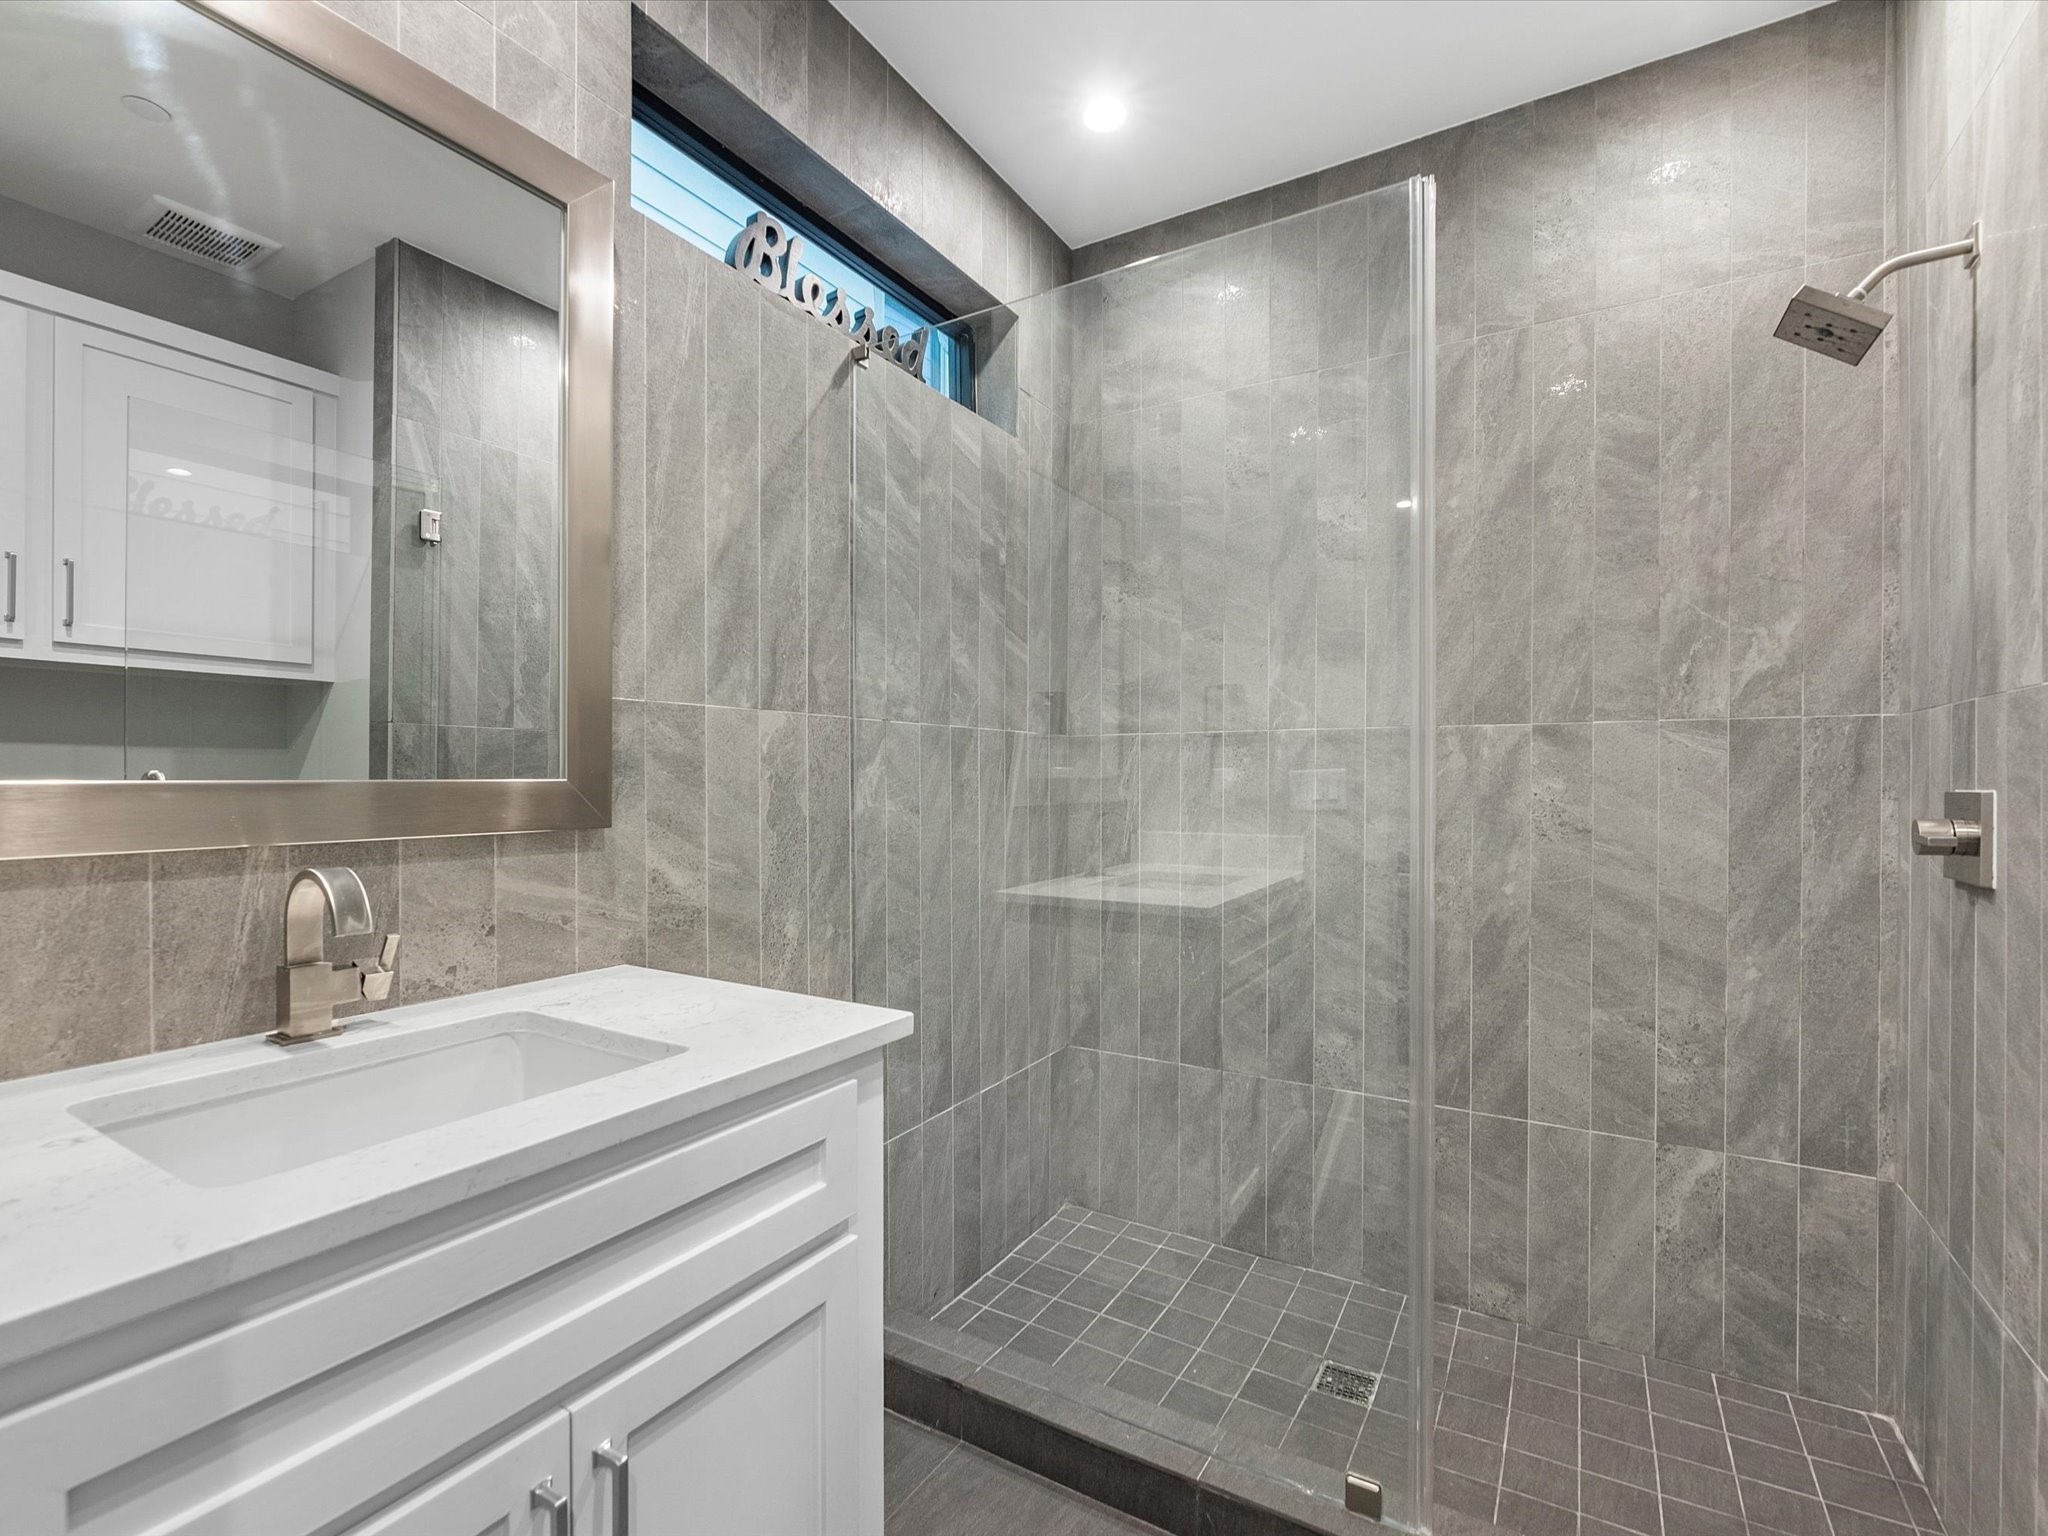 The first floor bathroom features a walk-in shower with tile surround, tile flooring, and sleek modern fixtures!